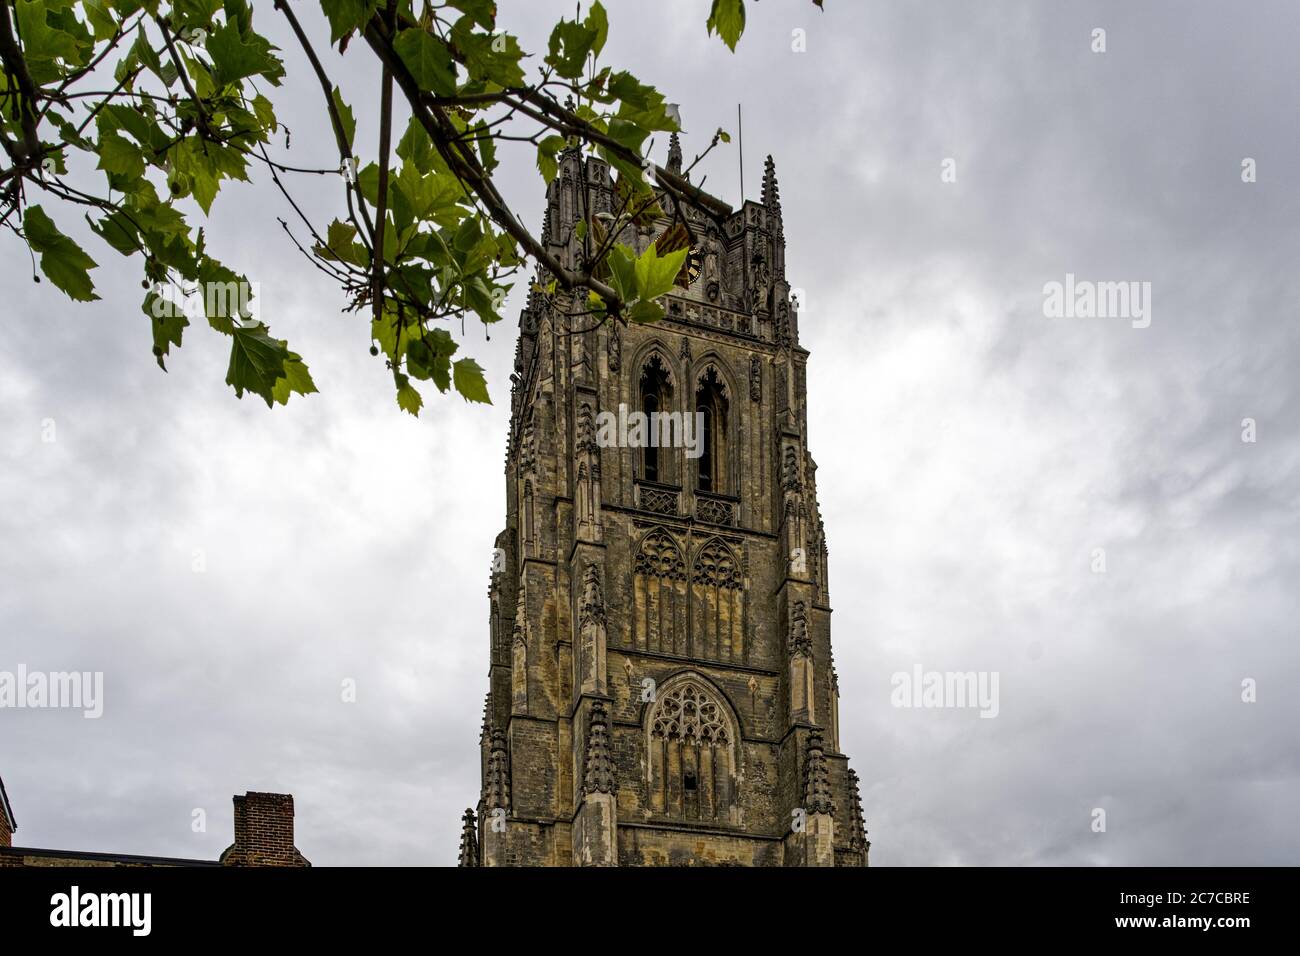 Beautiful shot of the Old Cathedral or Basilica of Our Lady in Tongeren, Belgium Stock Photo